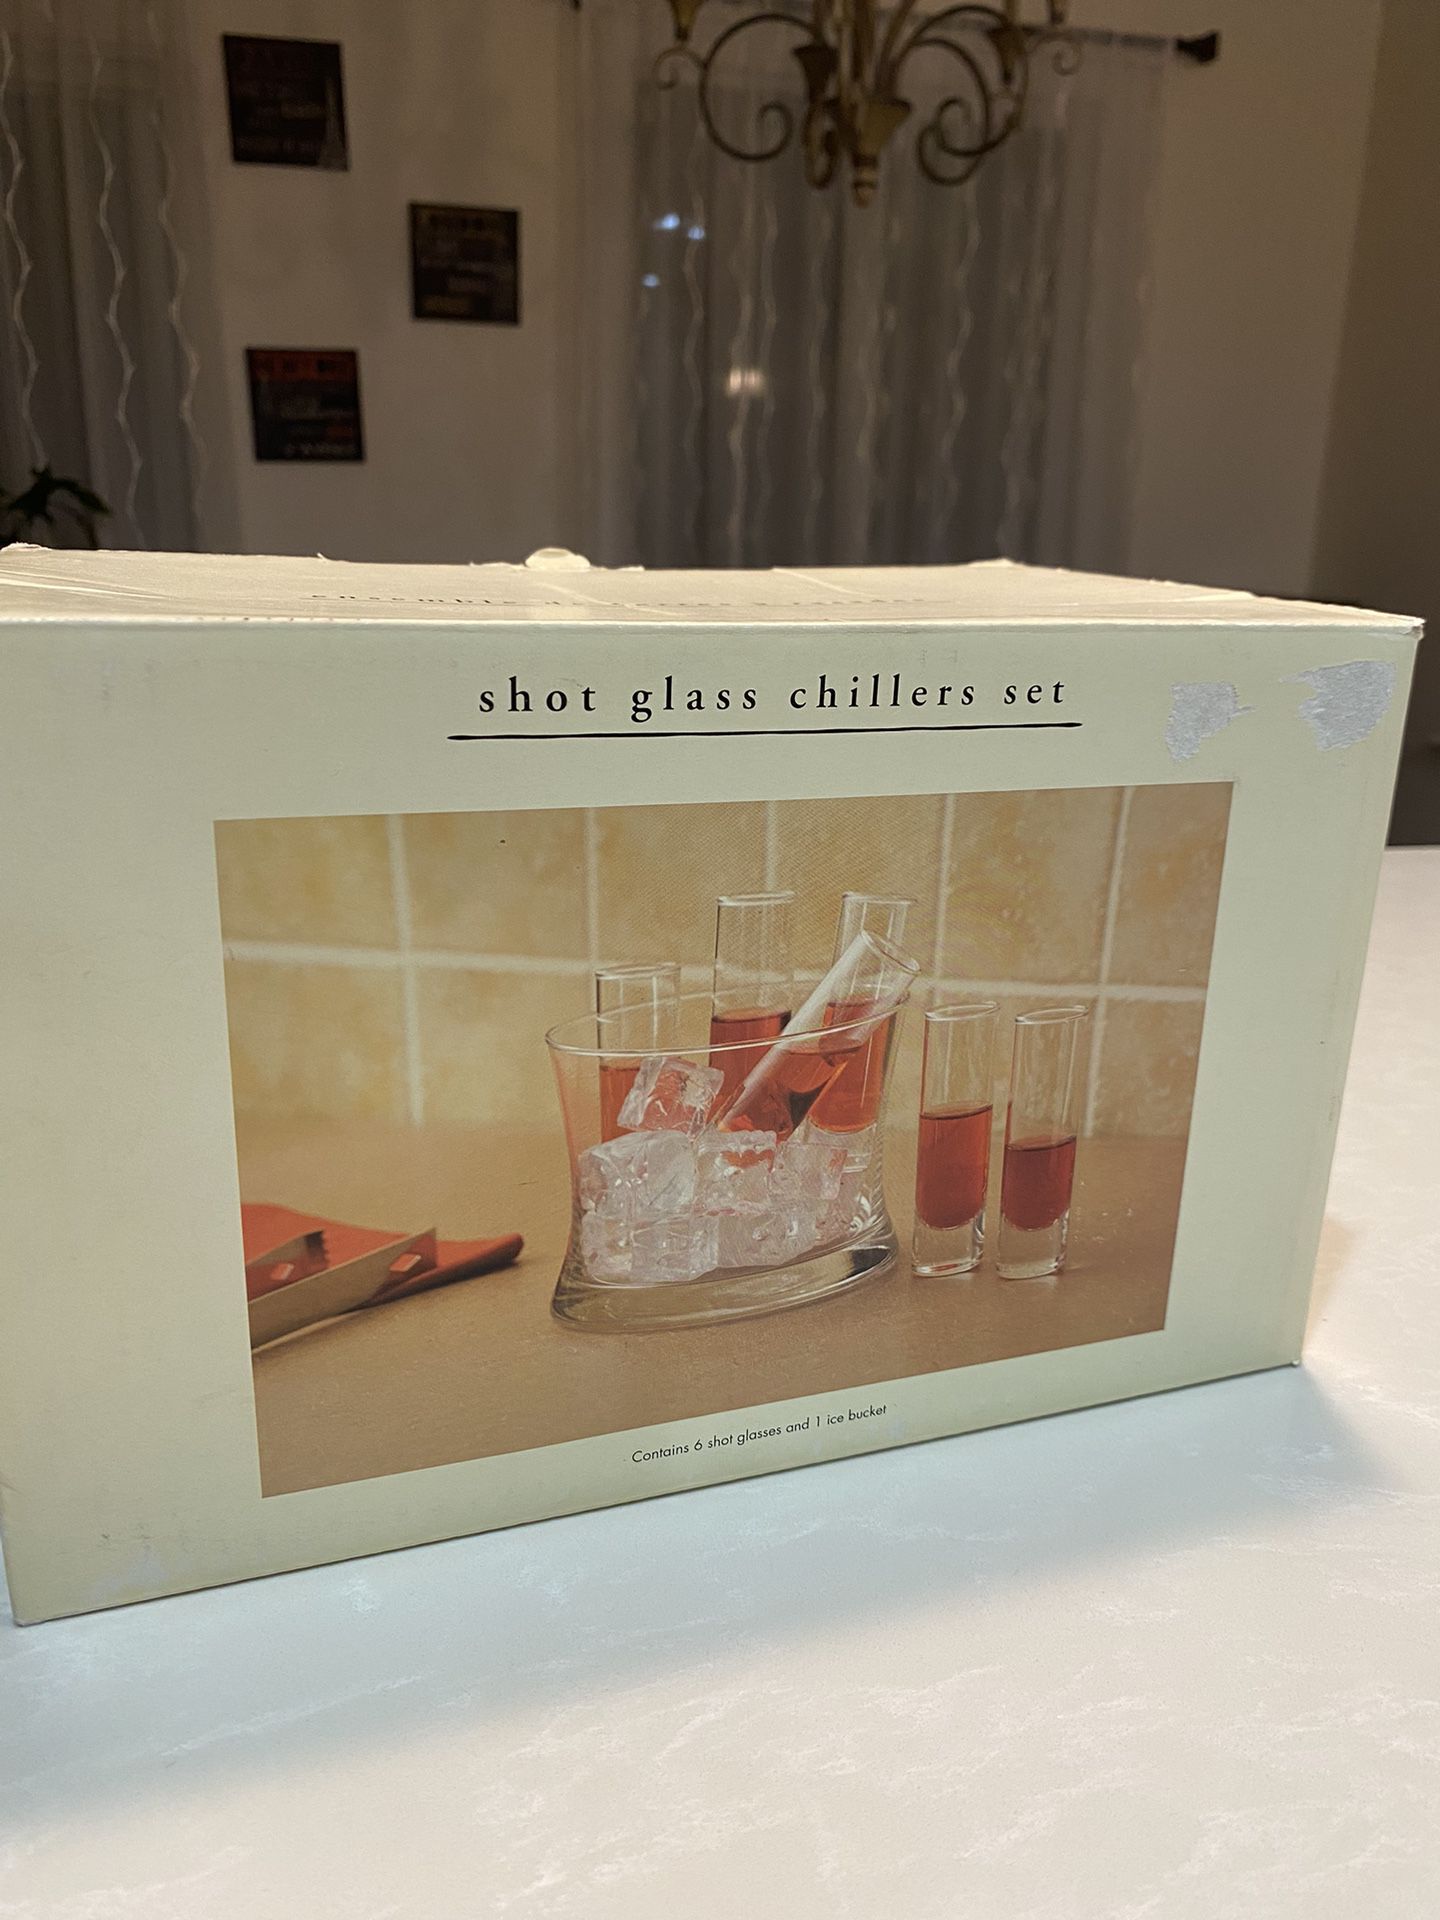 FREE Shot Glasses With Chiller Set